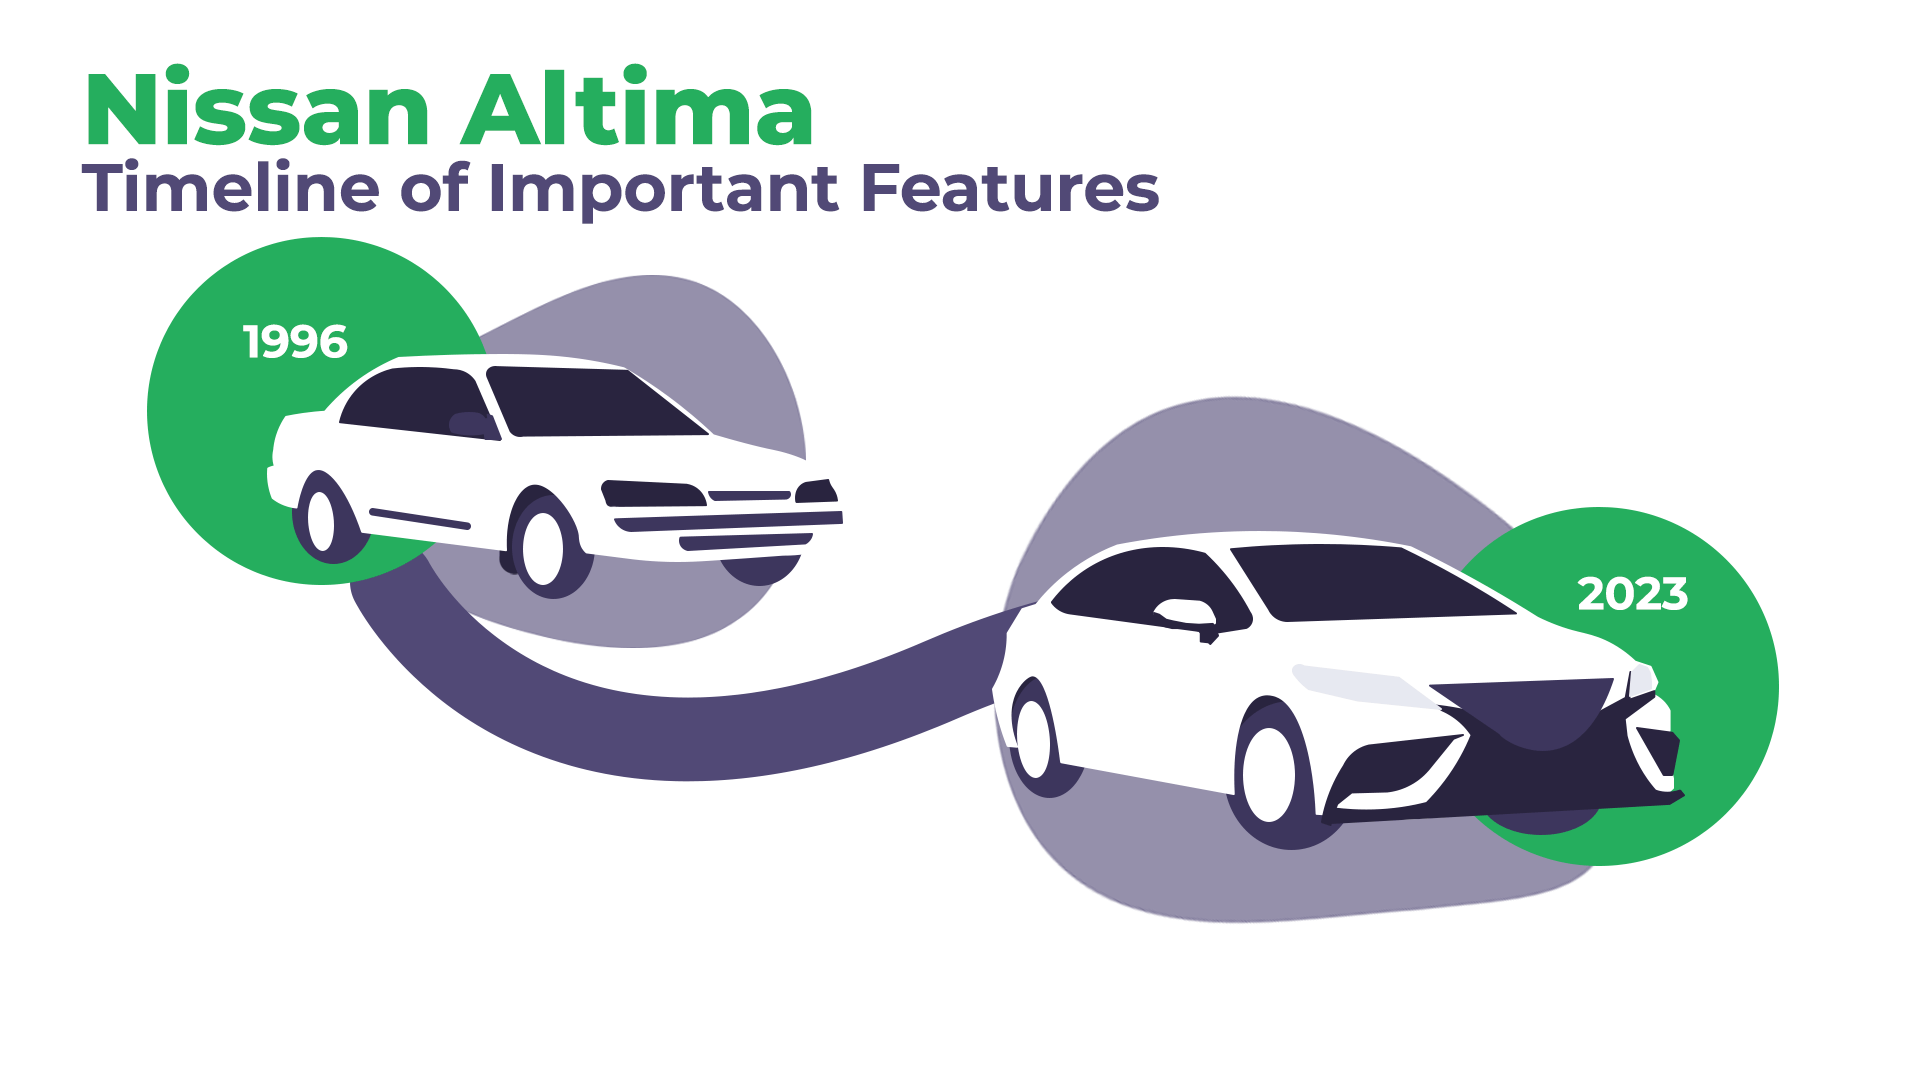 Nissan Altima Timeline of Important Features